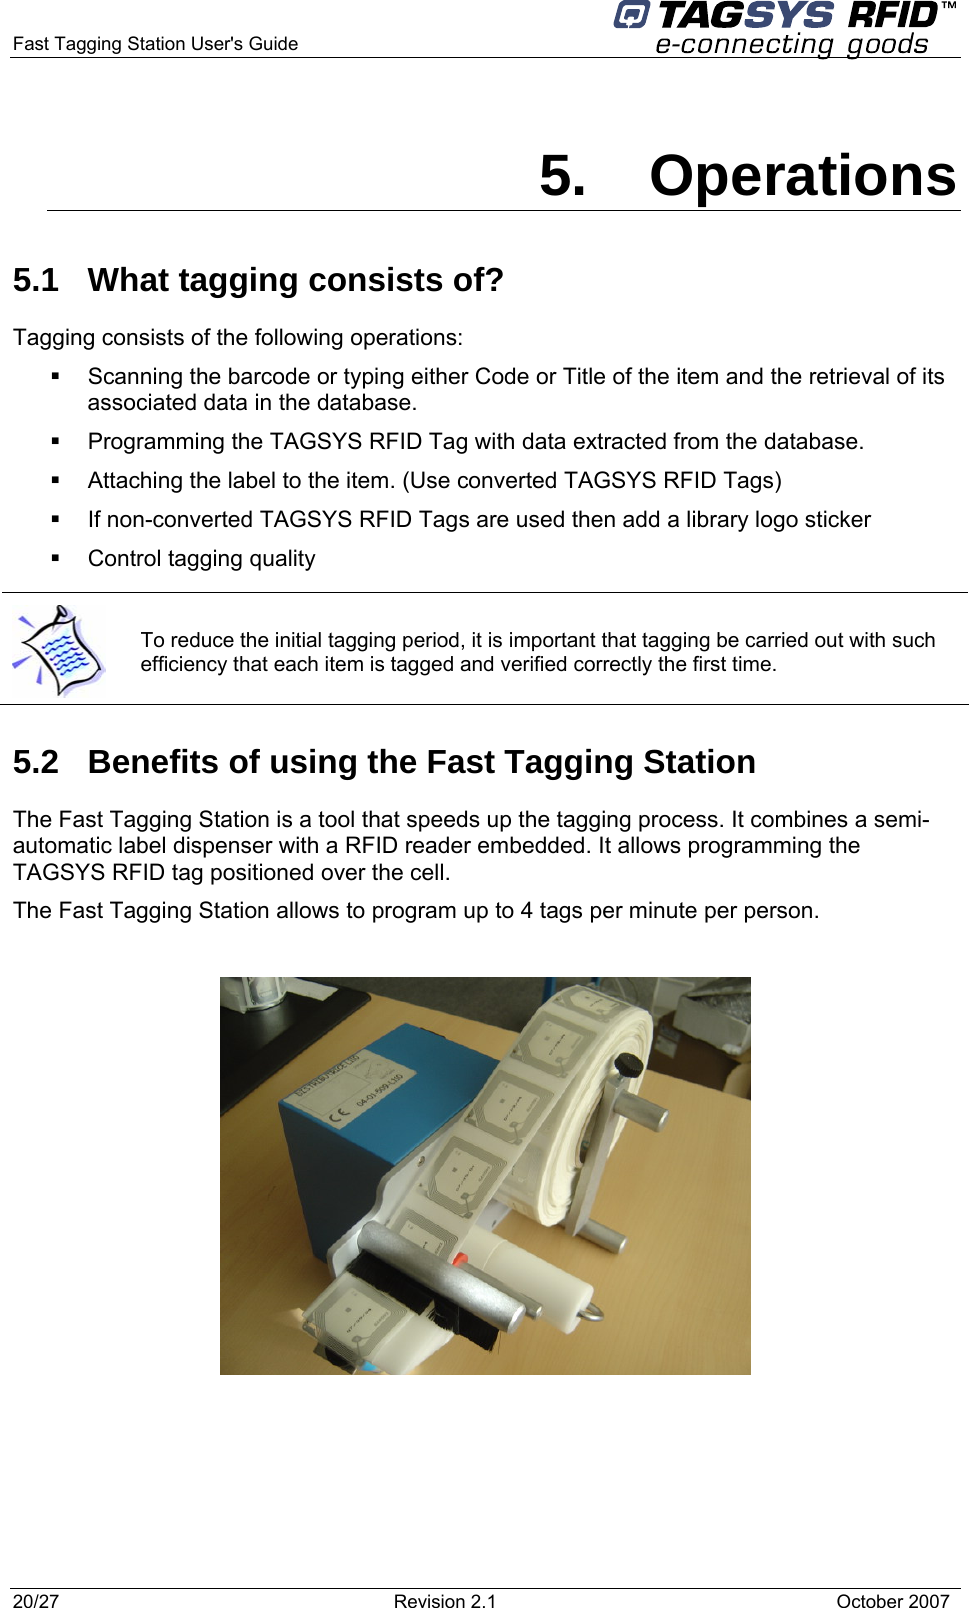  Fast Tagging Station User&apos;s Guide      5. Operations 5.1  What tagging consists of? Tagging consists of the following operations:   Scanning the barcode or typing either Code or Title of the item and the retrieval of its associated data in the database.   Programming the TAGSYS RFID Tag with data extracted from the database.   Attaching the label to the item. (Use converted TAGSYS RFID Tags)   If non-converted TAGSYS RFID Tags are used then add a library logo sticker   Control tagging quality  To reduce the initial tagging period, it is important that tagging be carried out with such efficiency that each item is tagged and verified correctly the first time. 5.2  Benefits of using the Fast Tagging Station  The Fast Tagging Station is a tool that speeds up the tagging process. It combines a semi-automatic label dispenser with a RFID reader embedded. It allows programming the TAGSYS RFID tag positioned over the cell.  The Fast Tagging Station allows to program up to 4 tags per minute per person.      20/27  Revision 2.1   October 2007 